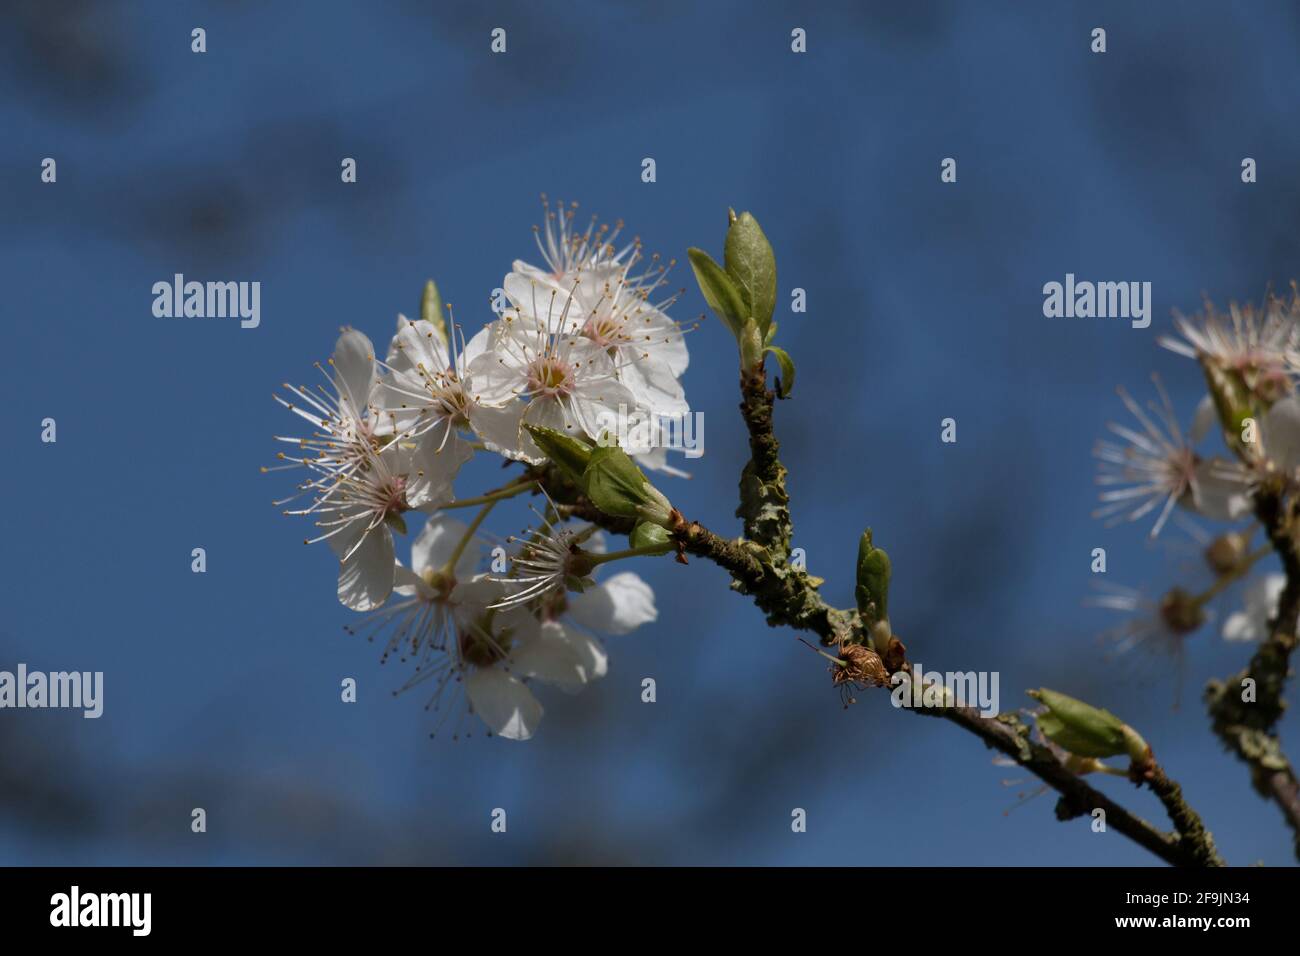 White damson tree blossom flowers, Prunus domestica insititia, blooming in springtime, close-up view Stock Photo